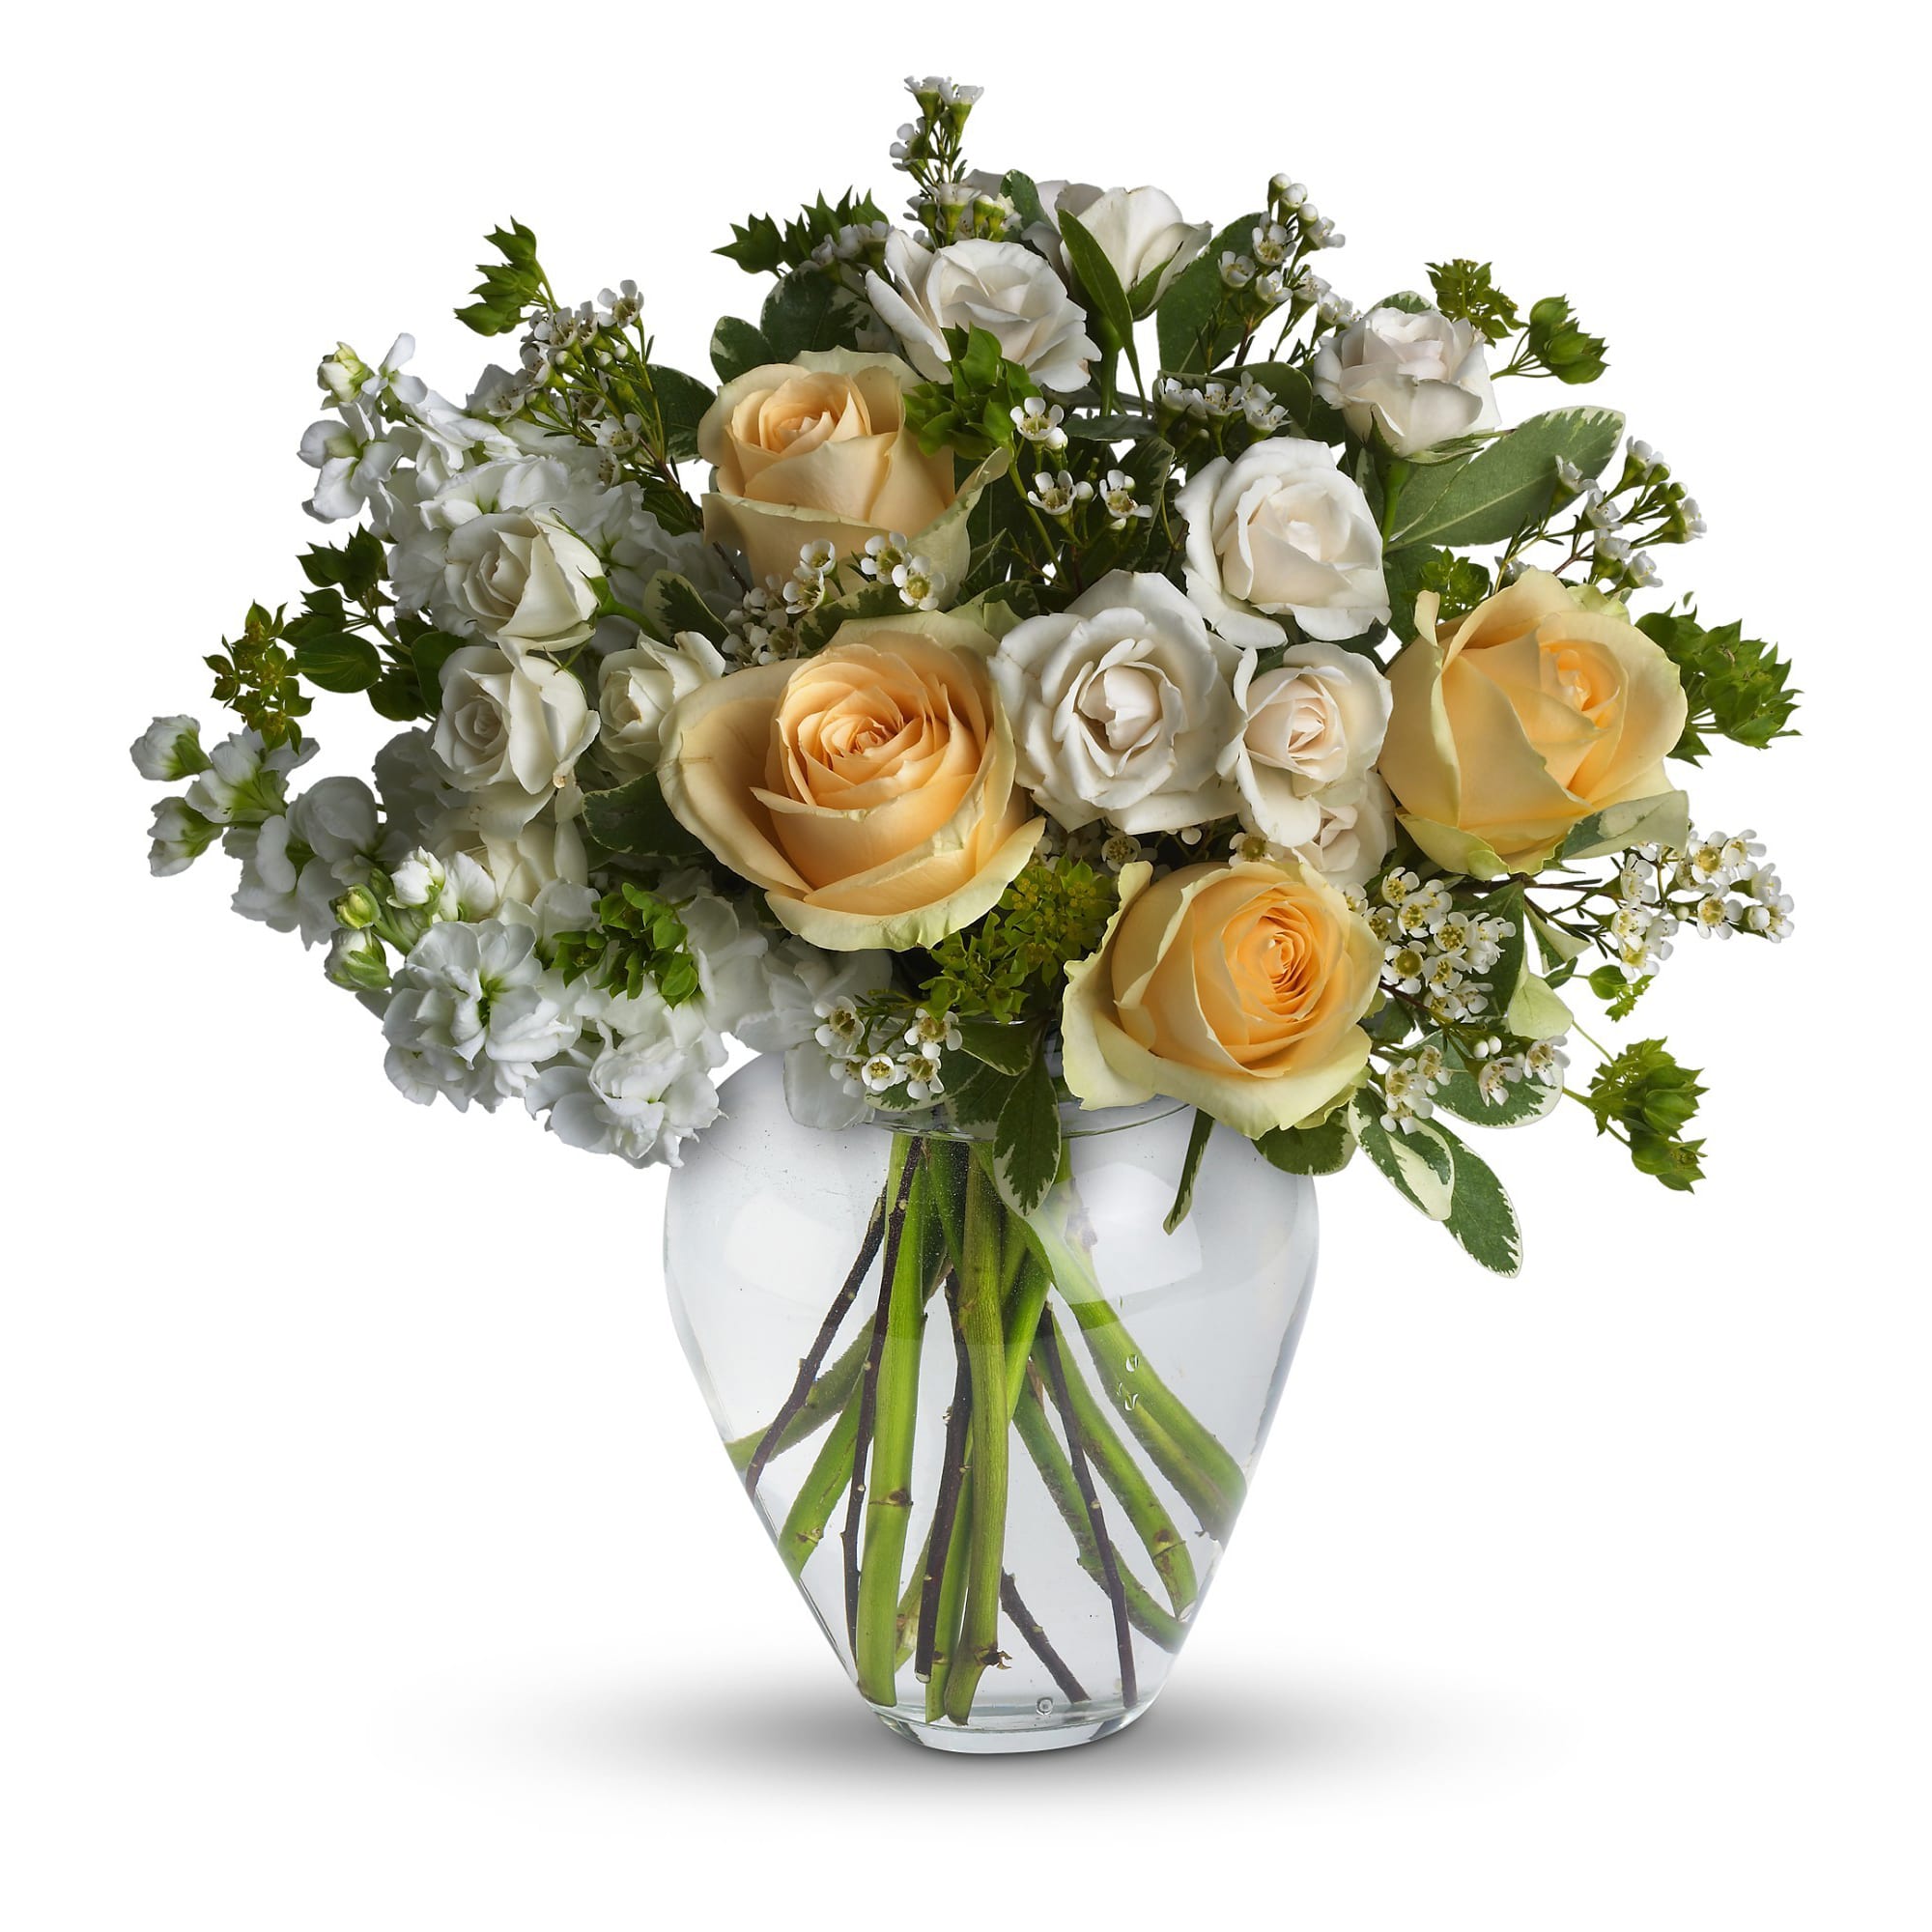 Celestial Love by Teleflora - Peaceful and pure. This pretty arrangement of white and light colors will let anyone know they are in your thoughts. 